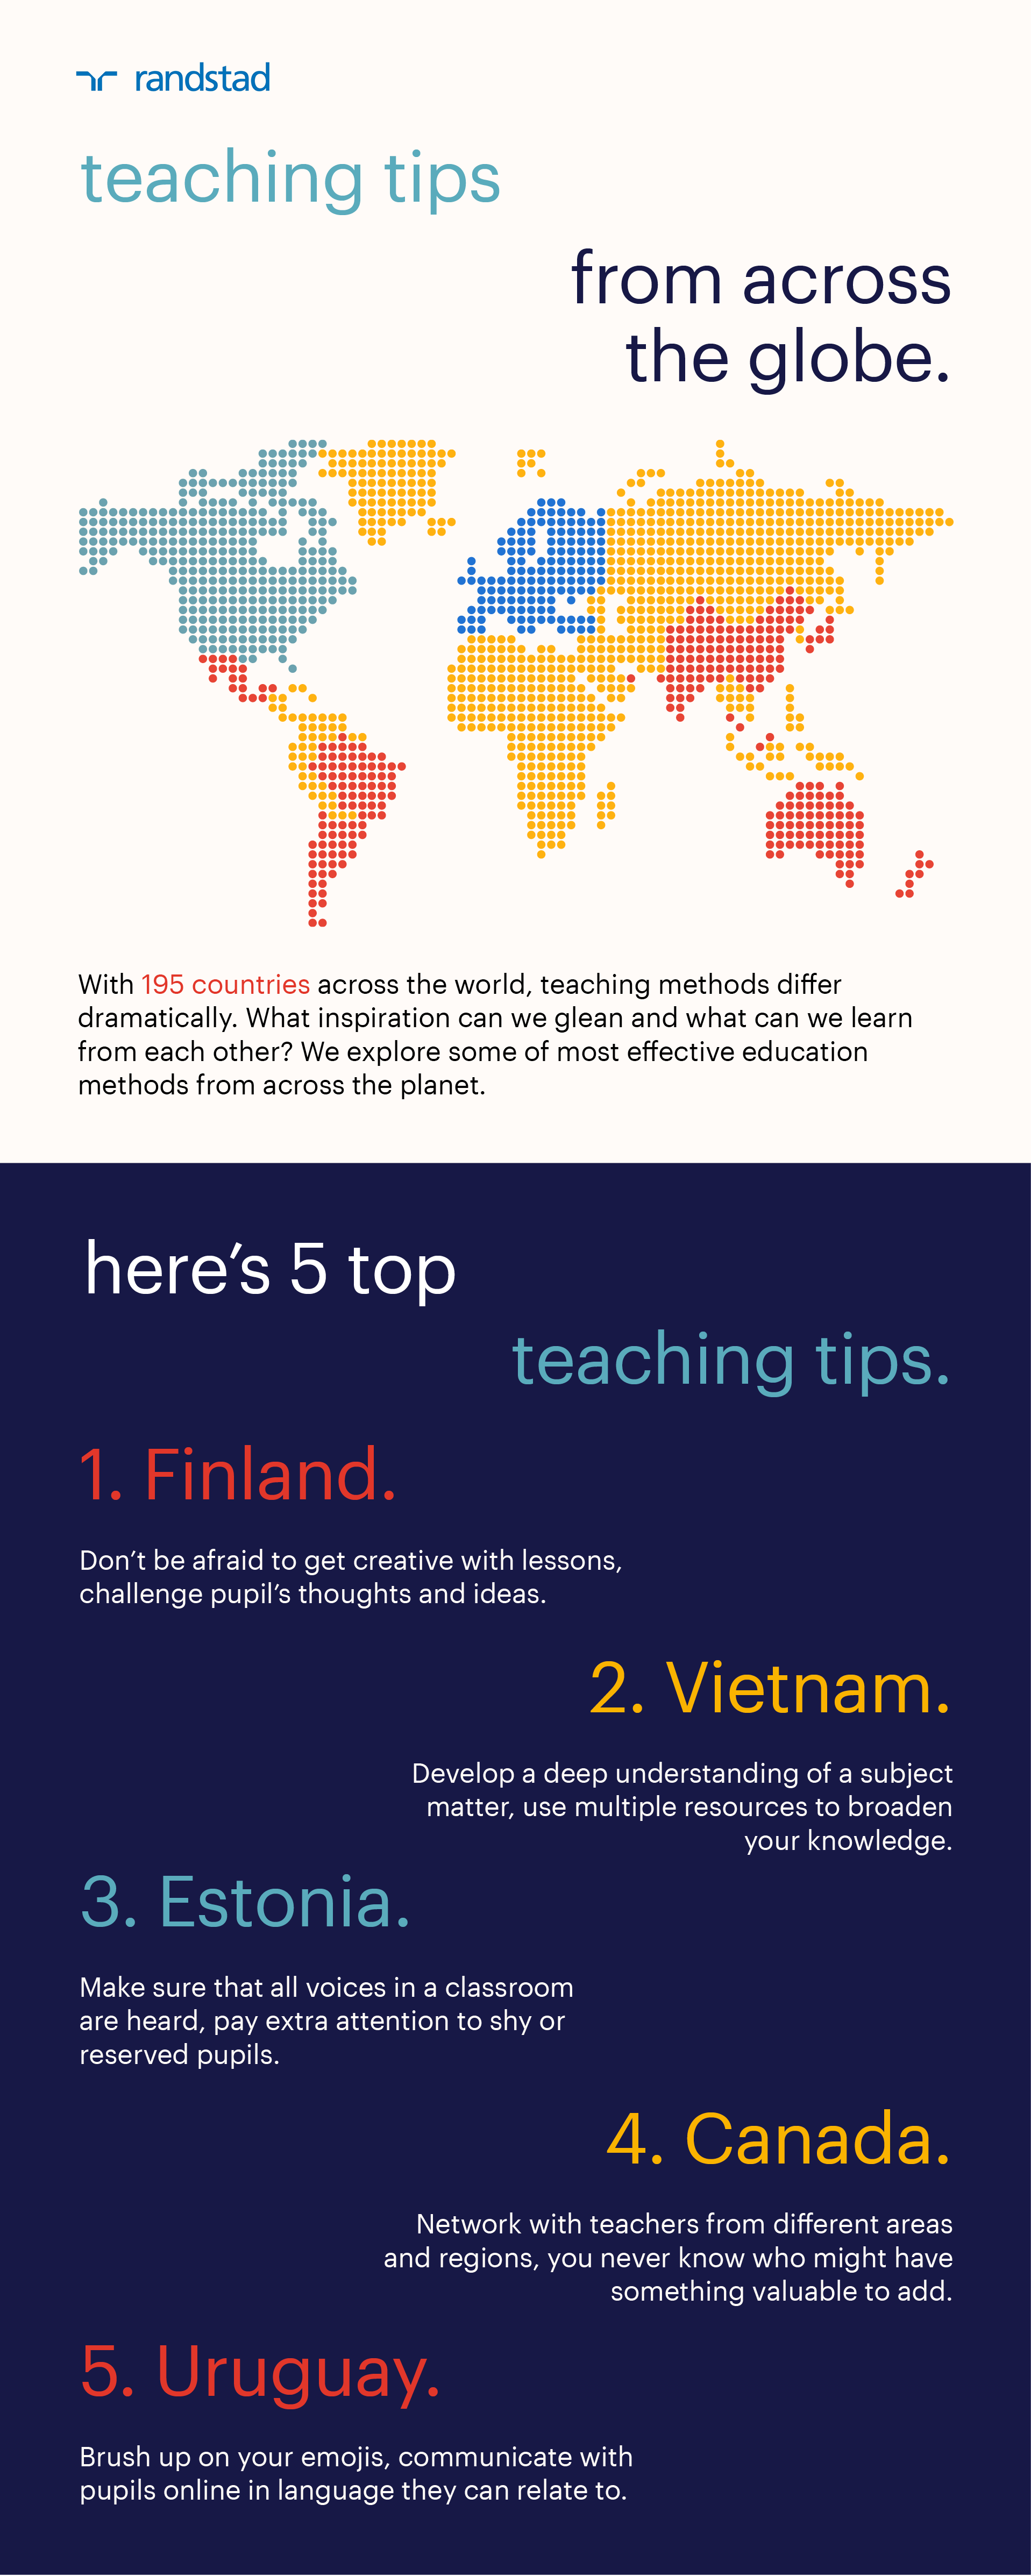 Top five teaching tips from across the globe.